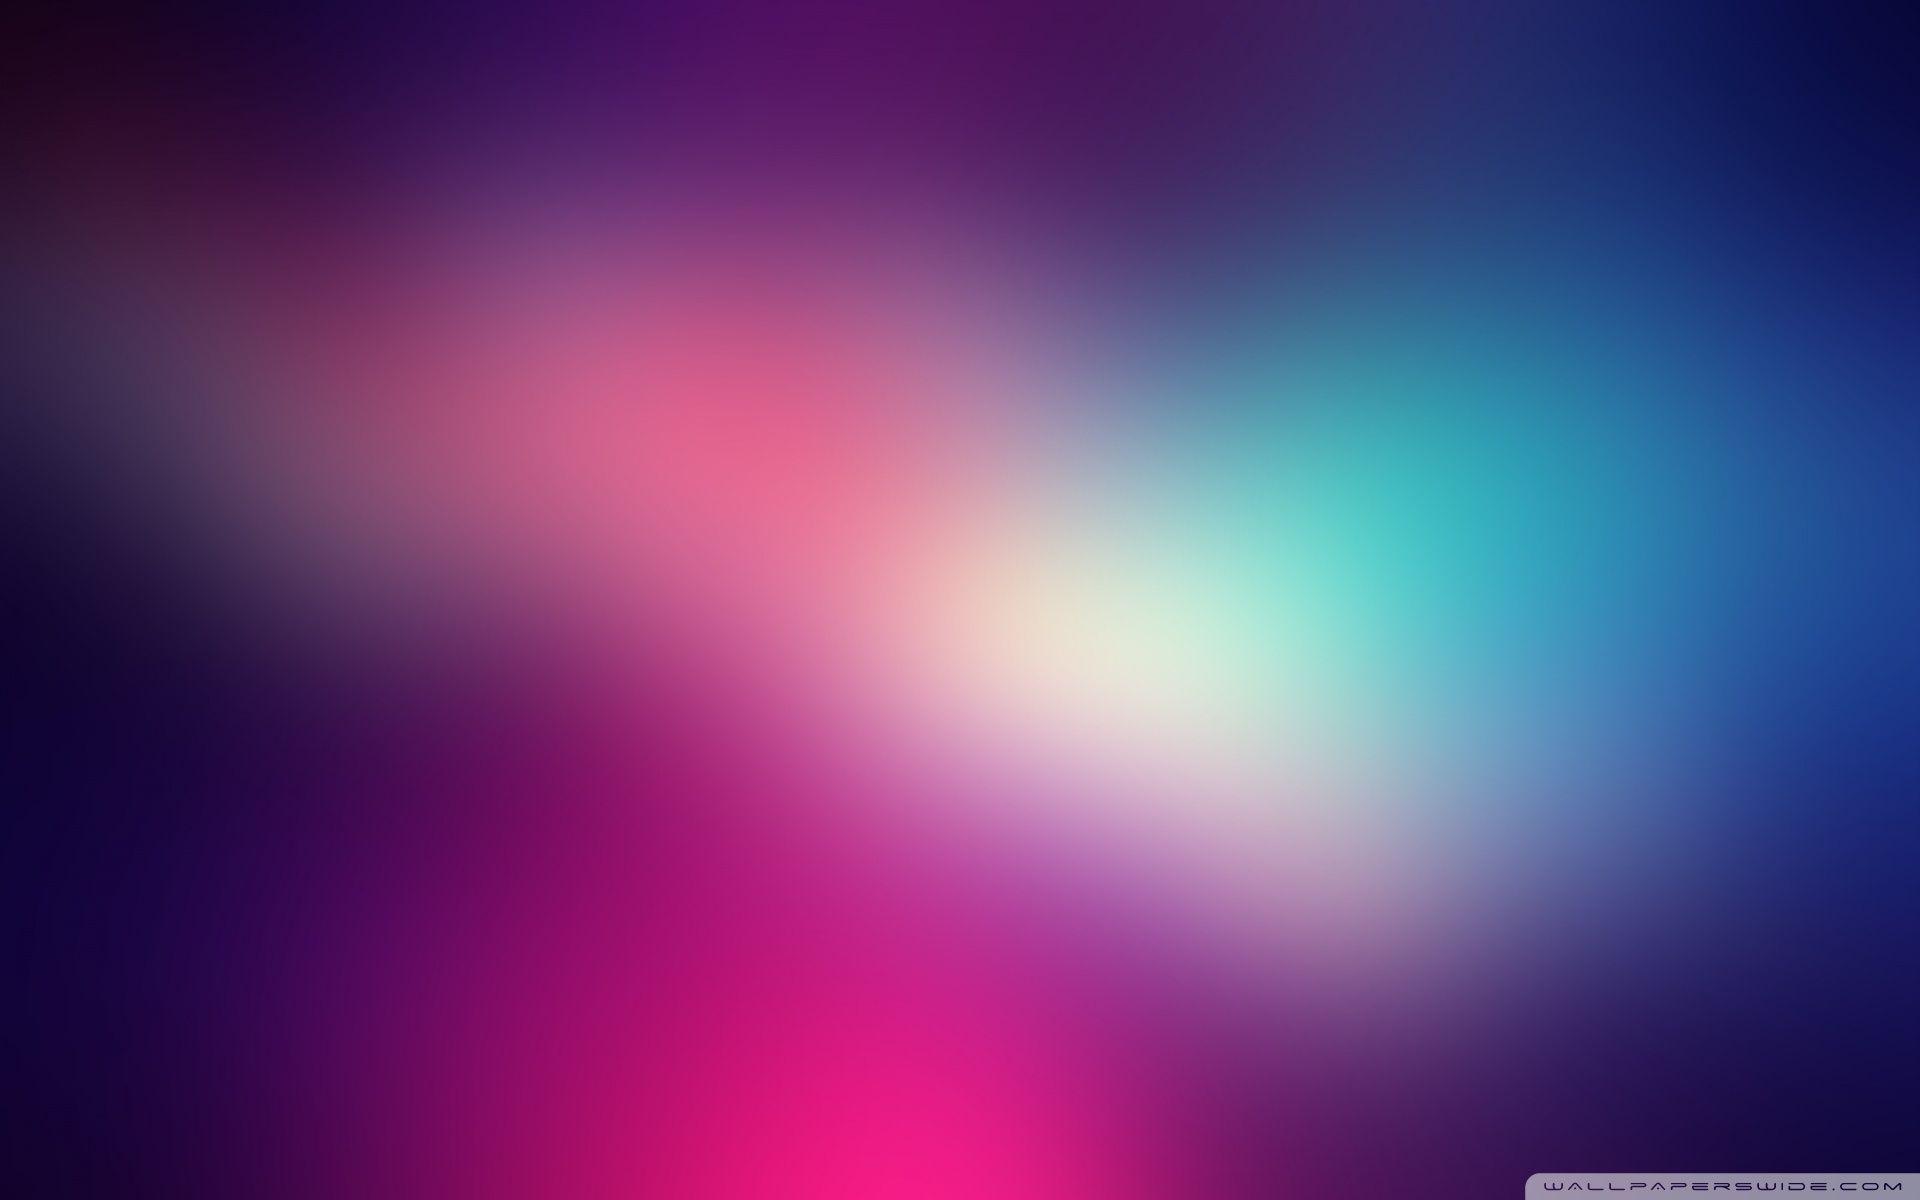 199 New Blur Background Full HD Images  Download 